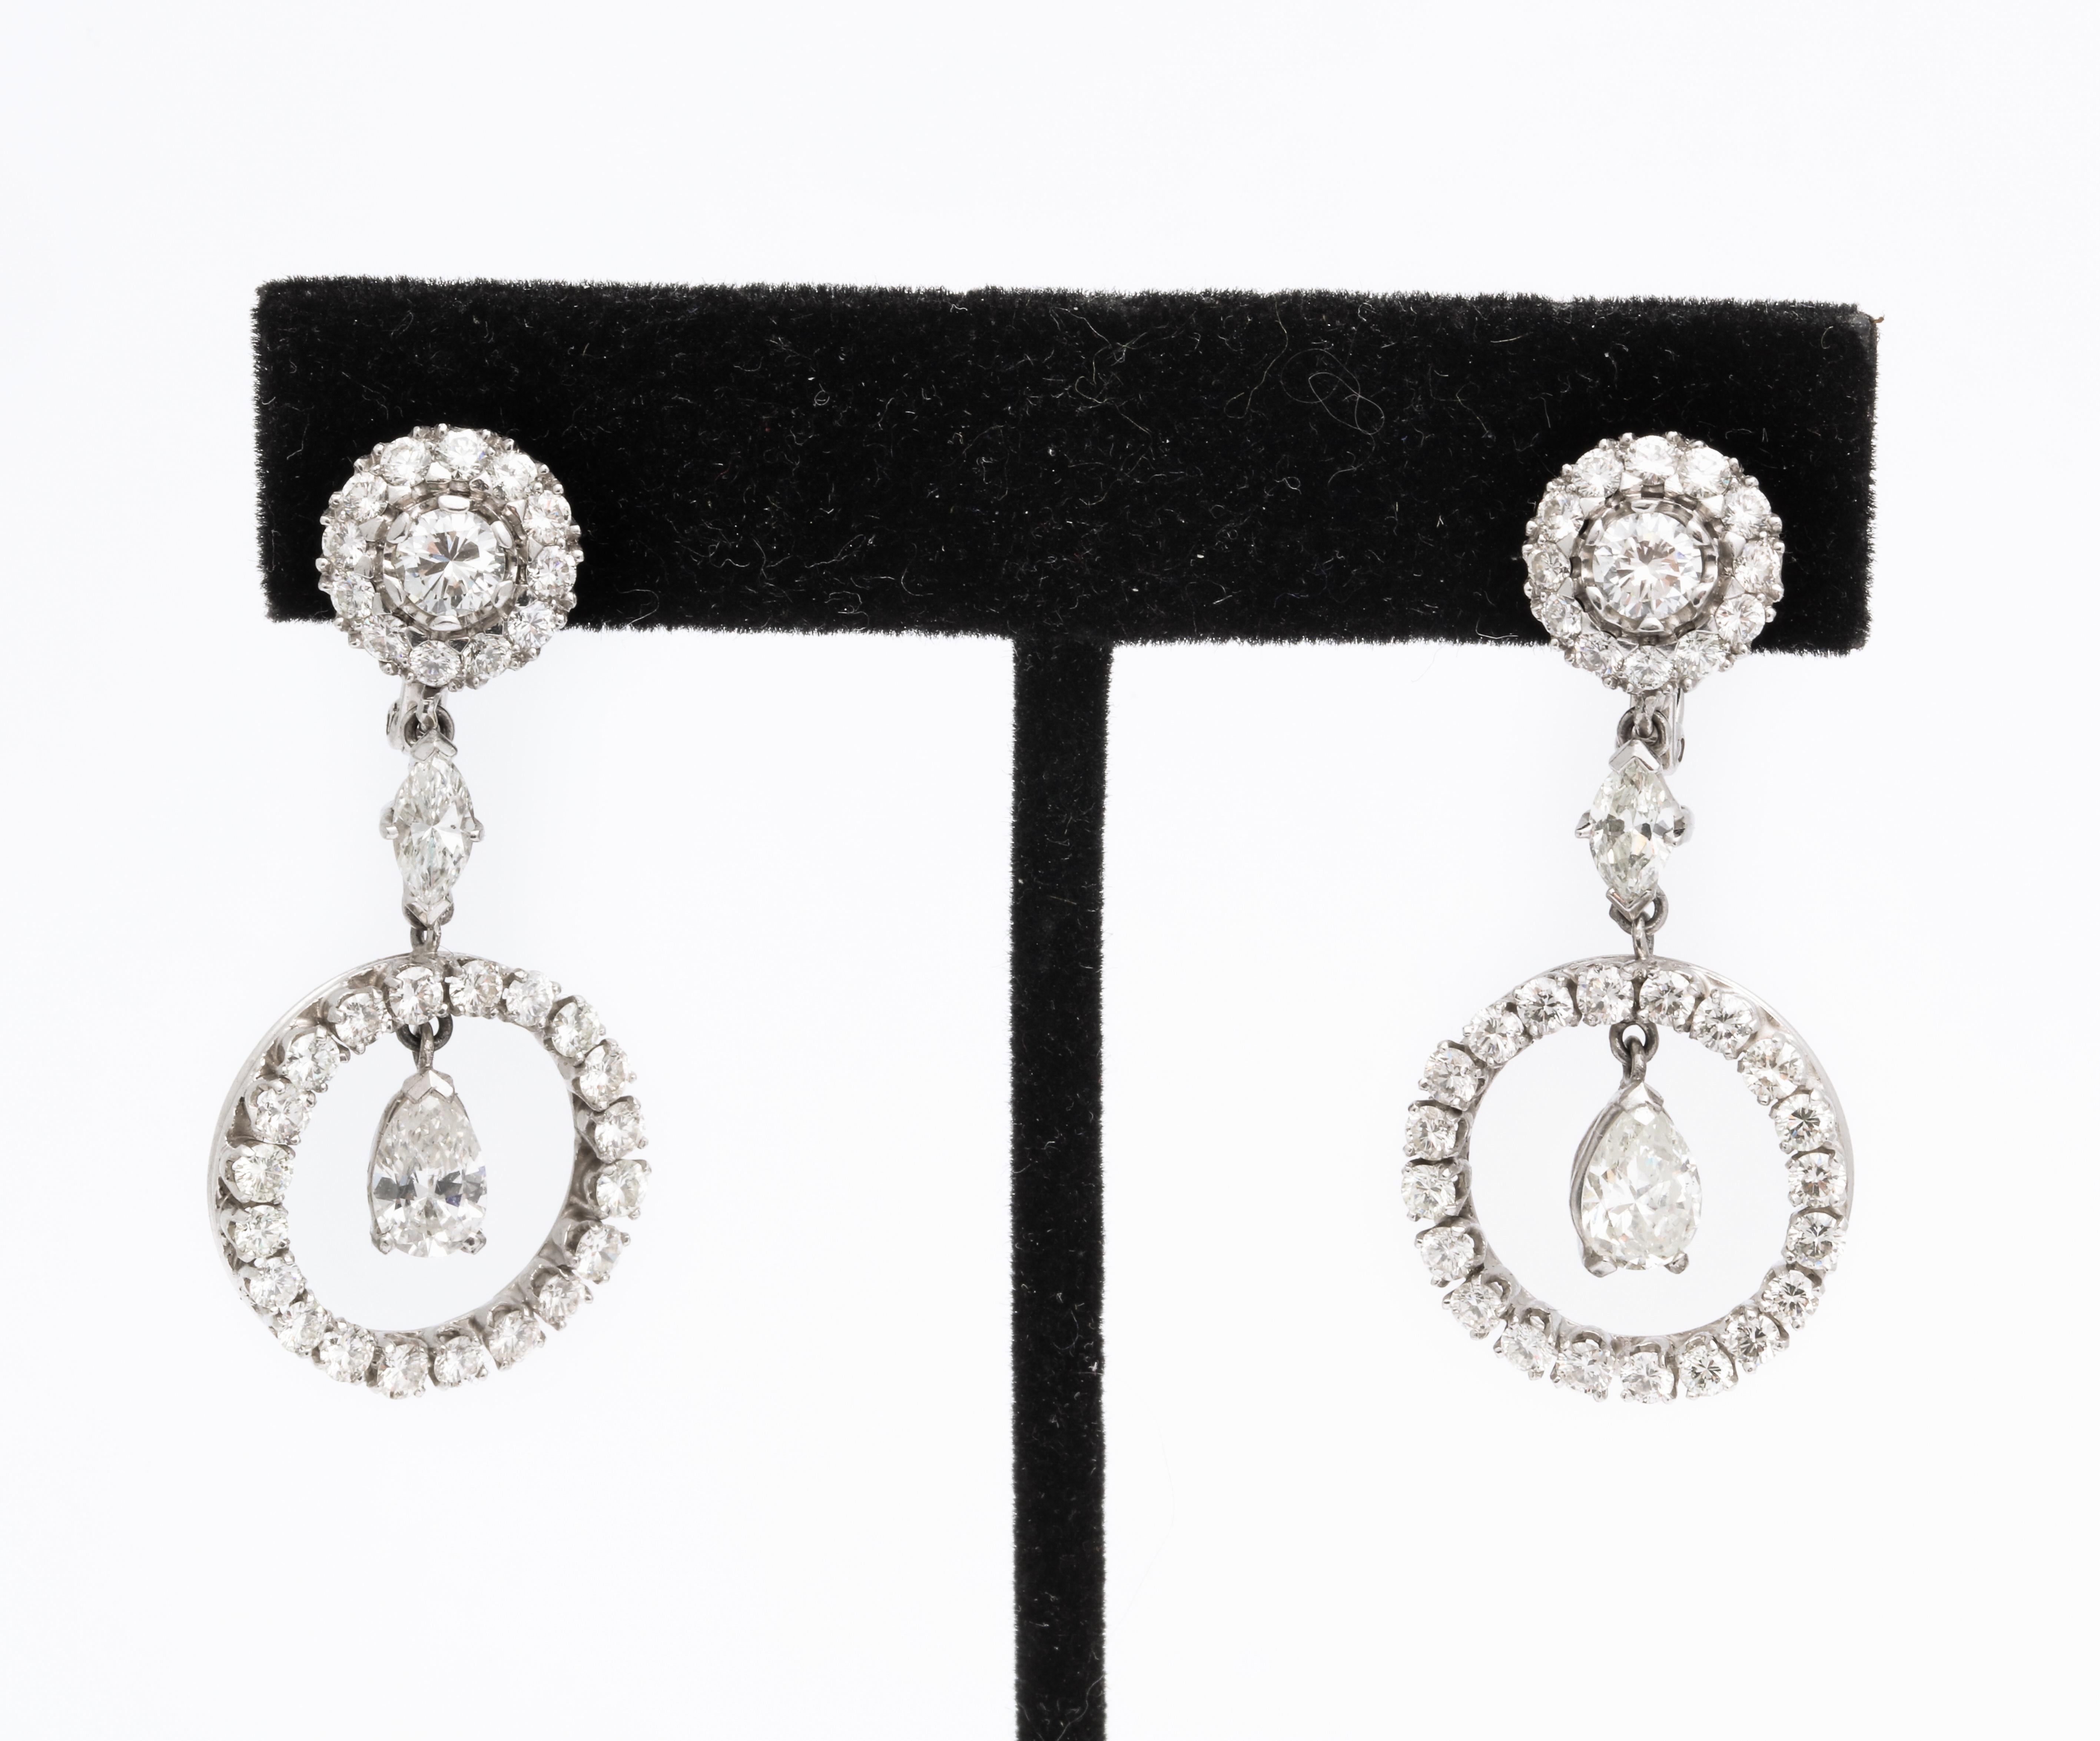 A pair of wonderful Art Deco Style diamond platinum dangle  earrings with pear-shaped diamonds dangling from a circle of diamonds connected by a marquise diamond . They are beautifully designed and comprised of  quality  diamonds.